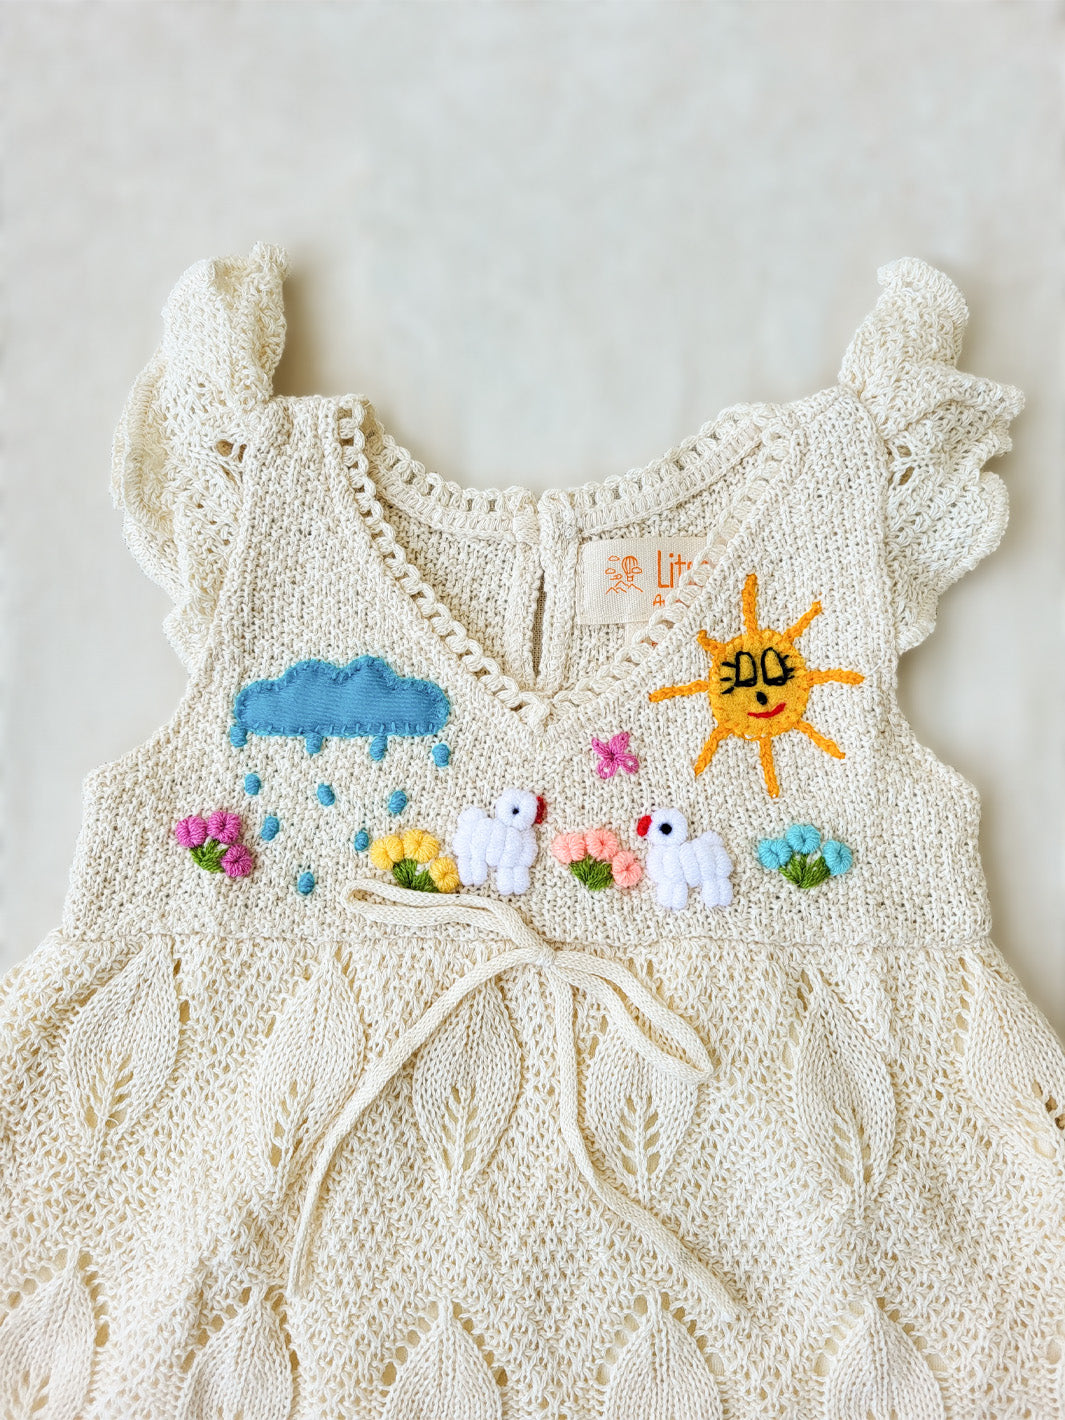 Explore the wild outdoors with your little one in the Pia Dress. Hand-embroidered with colorful designs inspired by farm animals and nature. Its cap sleeves and button behind the neck allow the perfect fit. This unique piece will spark your little one's imagination! A truly artisanal piece, with its natural cotton knitted pattern inspired by leaves and its inner layer in jersey cotton! Ekologisk klänning för flickor och bebisar.